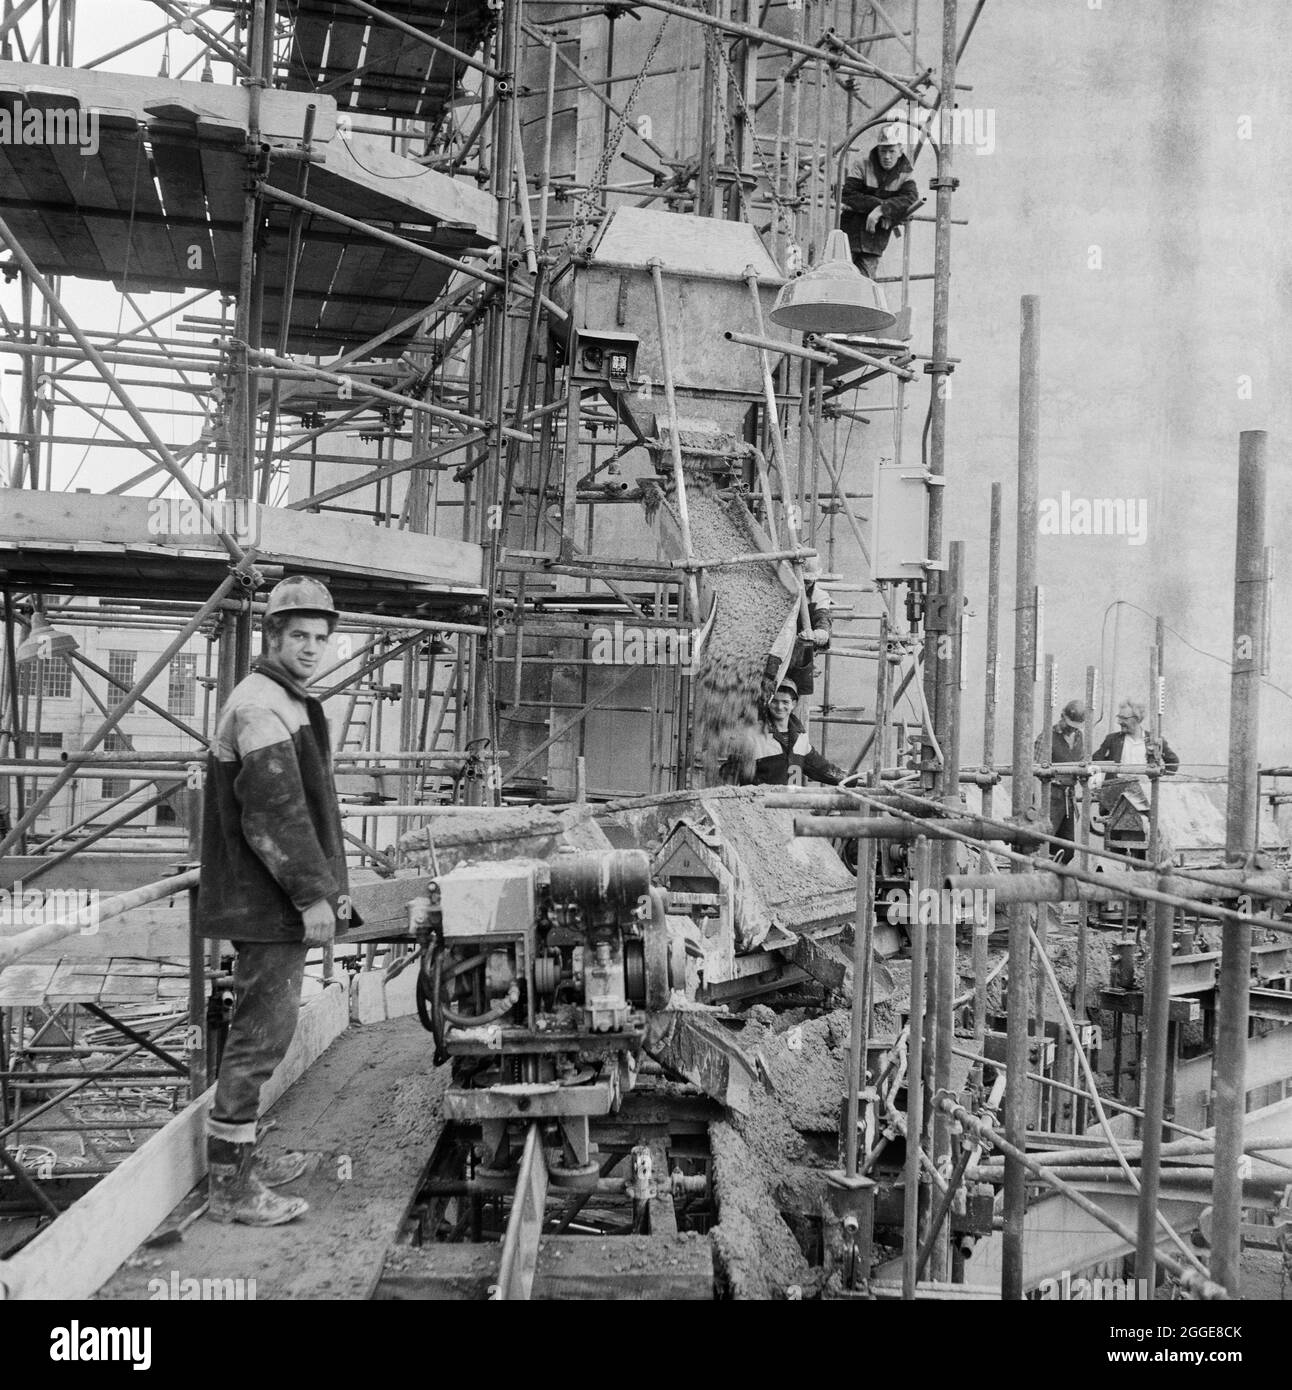 A view from scaffolding during the construction of a sugar silo at the Allscott Sugar Beet Factory, showing some of the team working on the site and concrete being poured from a hopper. A sugar beet factory was at Allscott from 1927 until it closed in 2007. Laing built two sugar silos here in 1961 for the British Sugar Corporation who were the owners of the site. Each silo was able to store 10,000 tons of granulated sugar and at the time they were constructed, they were the tallest that Laing had built so far using sliding formwork. Stock Photo